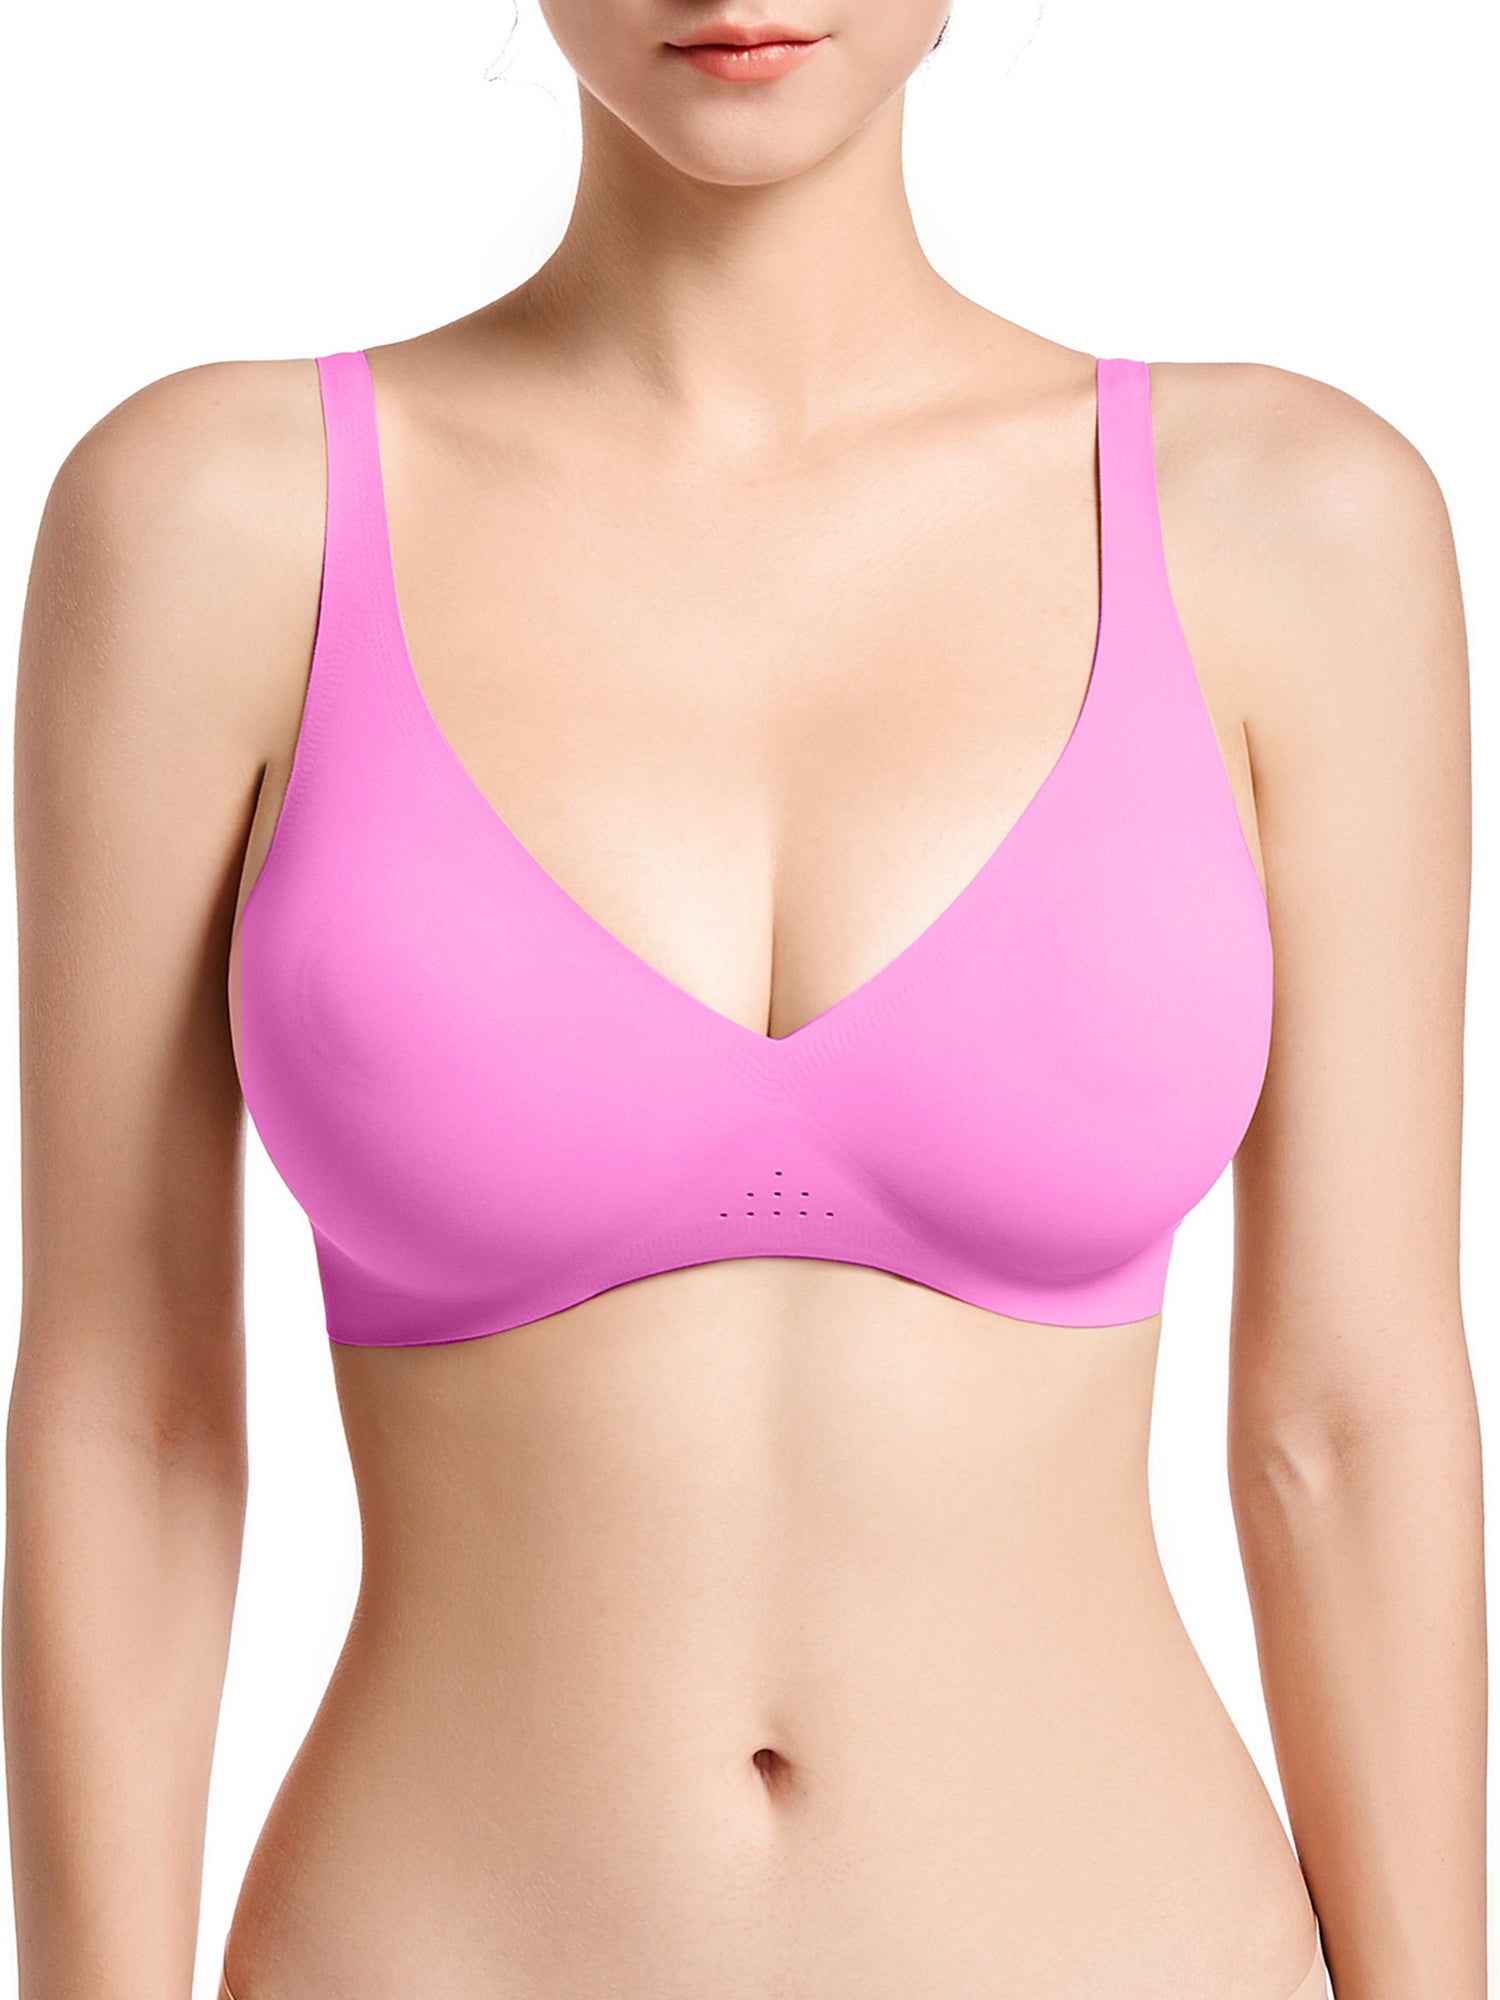 SHAPERX Women's Full-Coverage Unlined Plunge Bra Soft Wirefree Bralette with Everyday Comfort SHAPERX